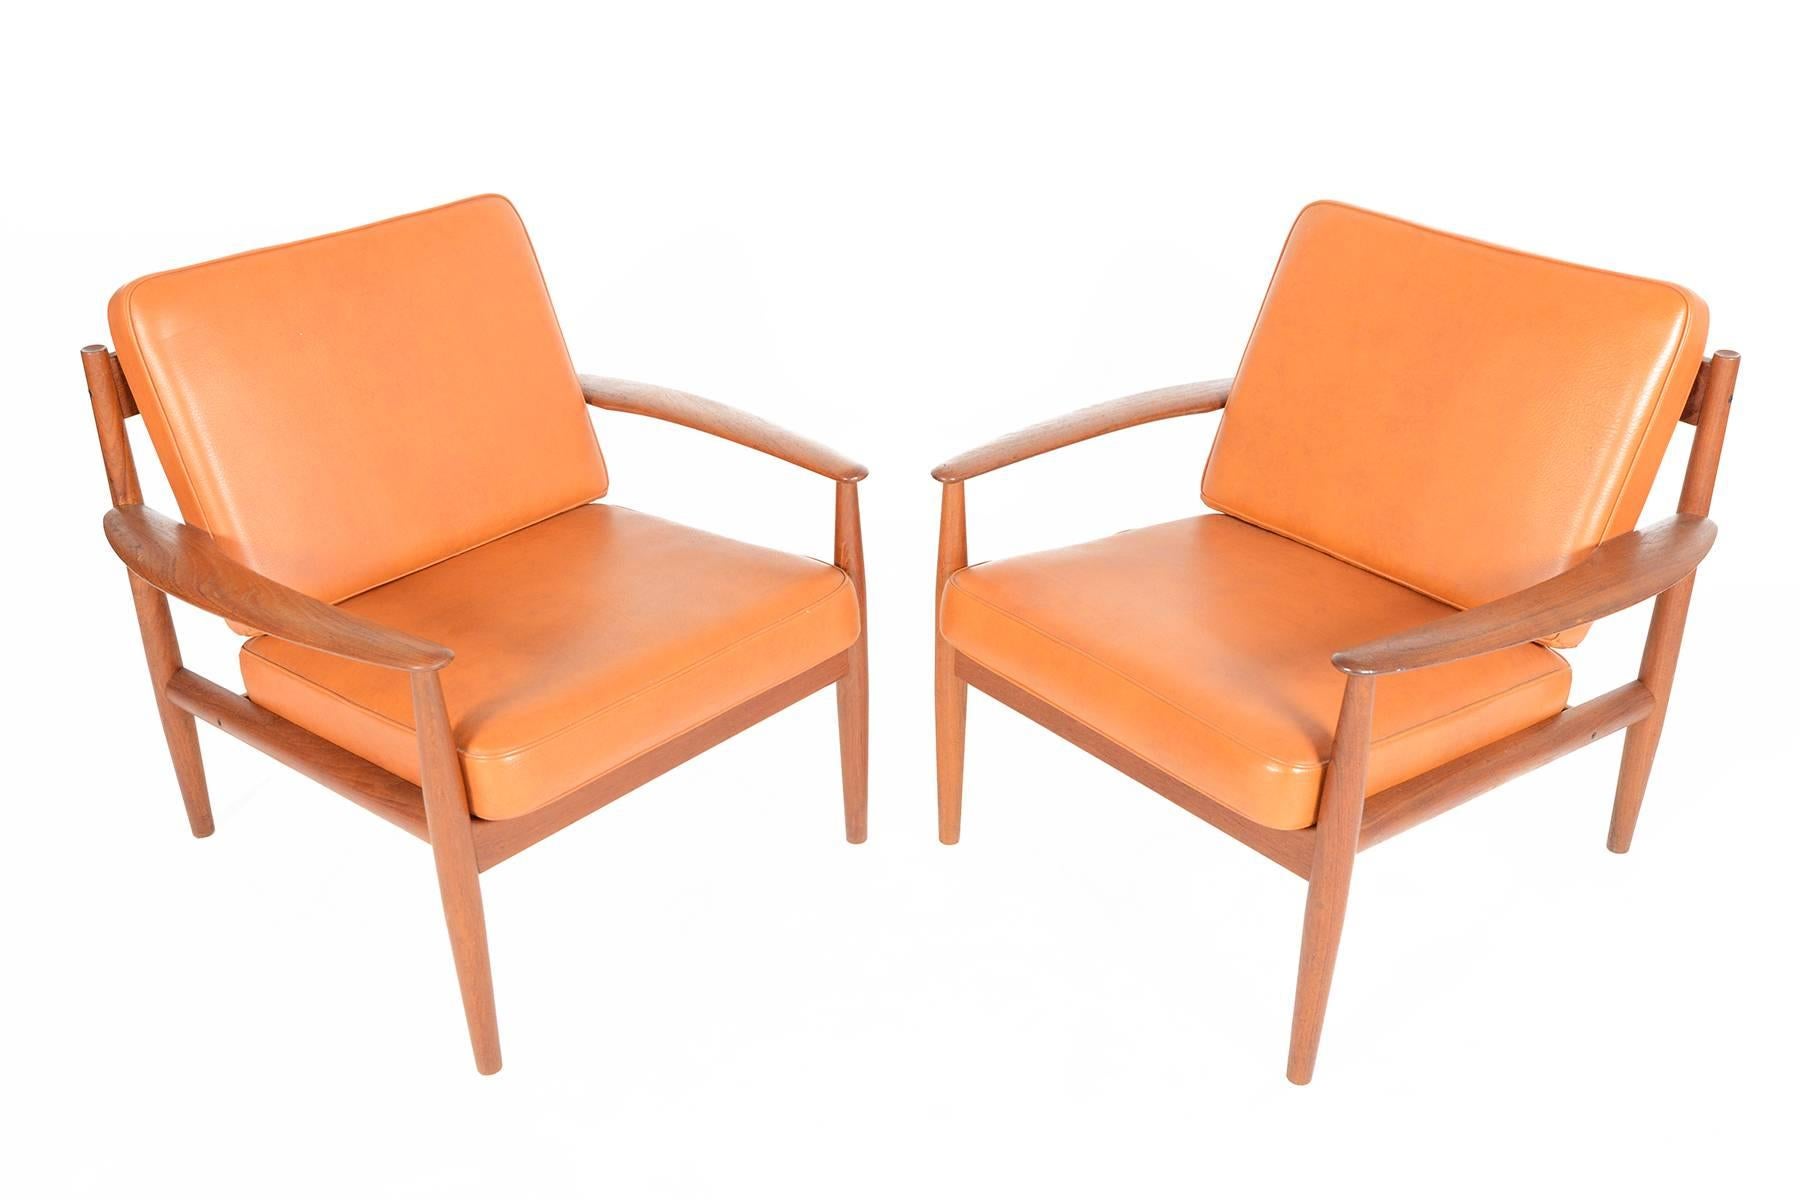 This beautifully sculpted pair of teak lounge chairs was designed by Grete Jalk for France and Son in the 1950s. Excellently crafted in solid teak, this pair will make the perfect addition to any modern home. Large cigar style armrests and contoured